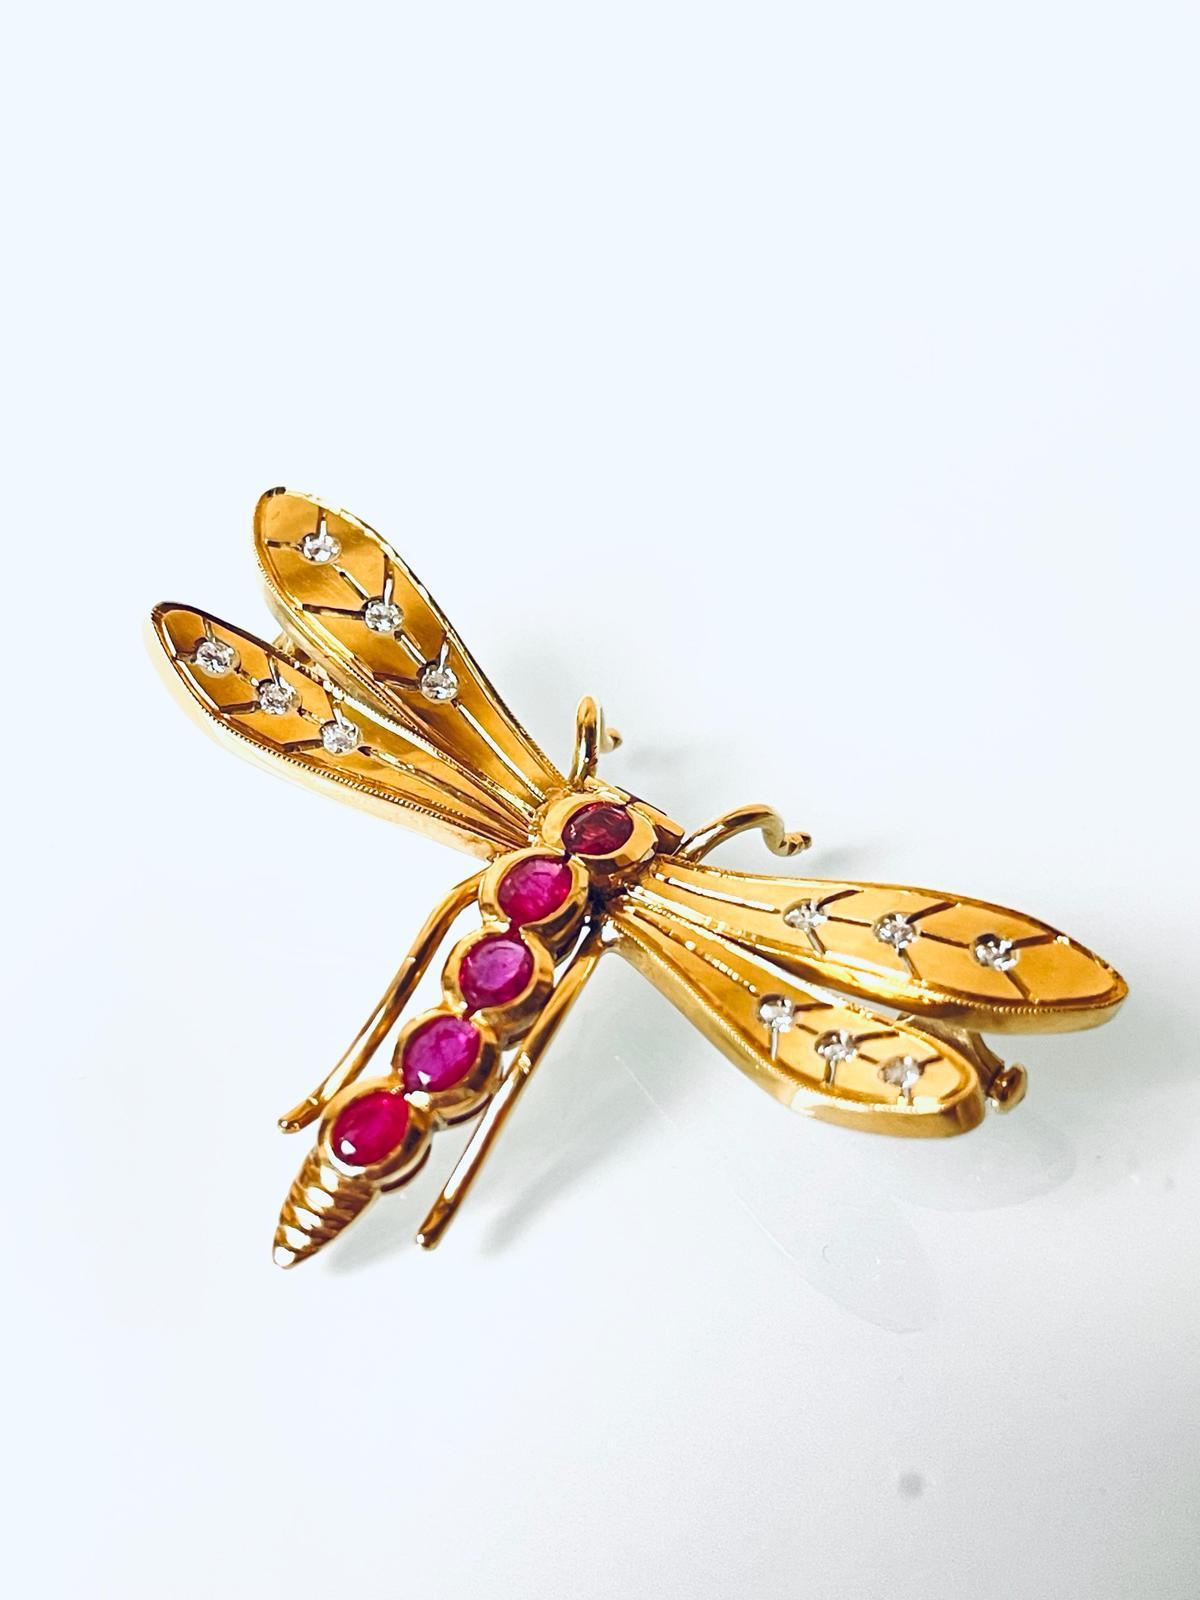 Brilliant Cut Vintage 18K Yellow Gold, Ruby Diamond Dragonfly Brooch For Sale